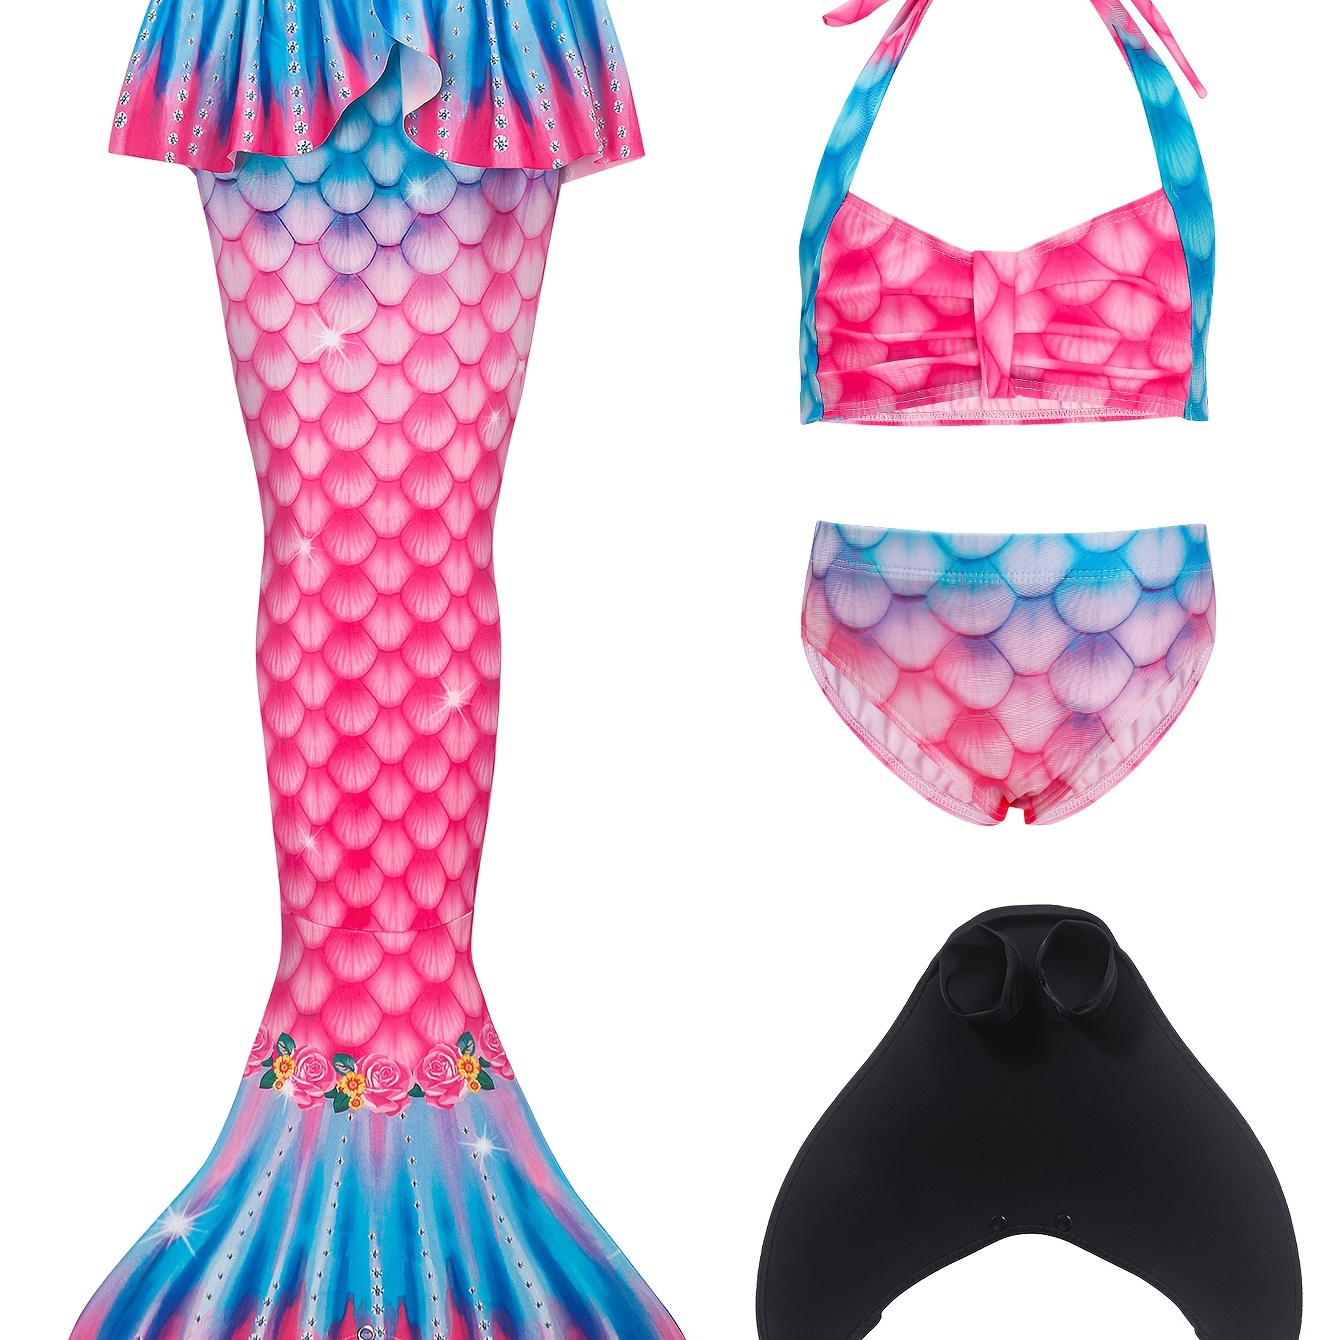 

4pcs Girls Mermaid Tail Bikini Swimsuit Set With Swimming Fin For Summer Beach Holiday Gift Party Performance